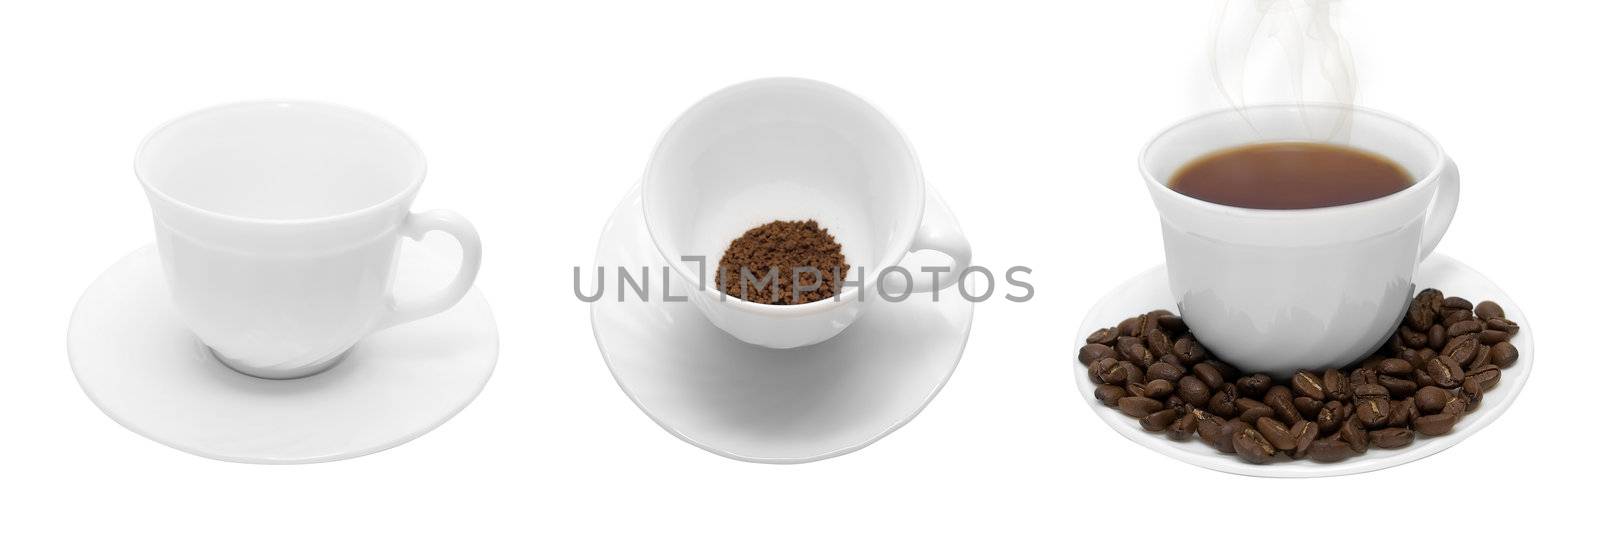 coffee cup by rusak